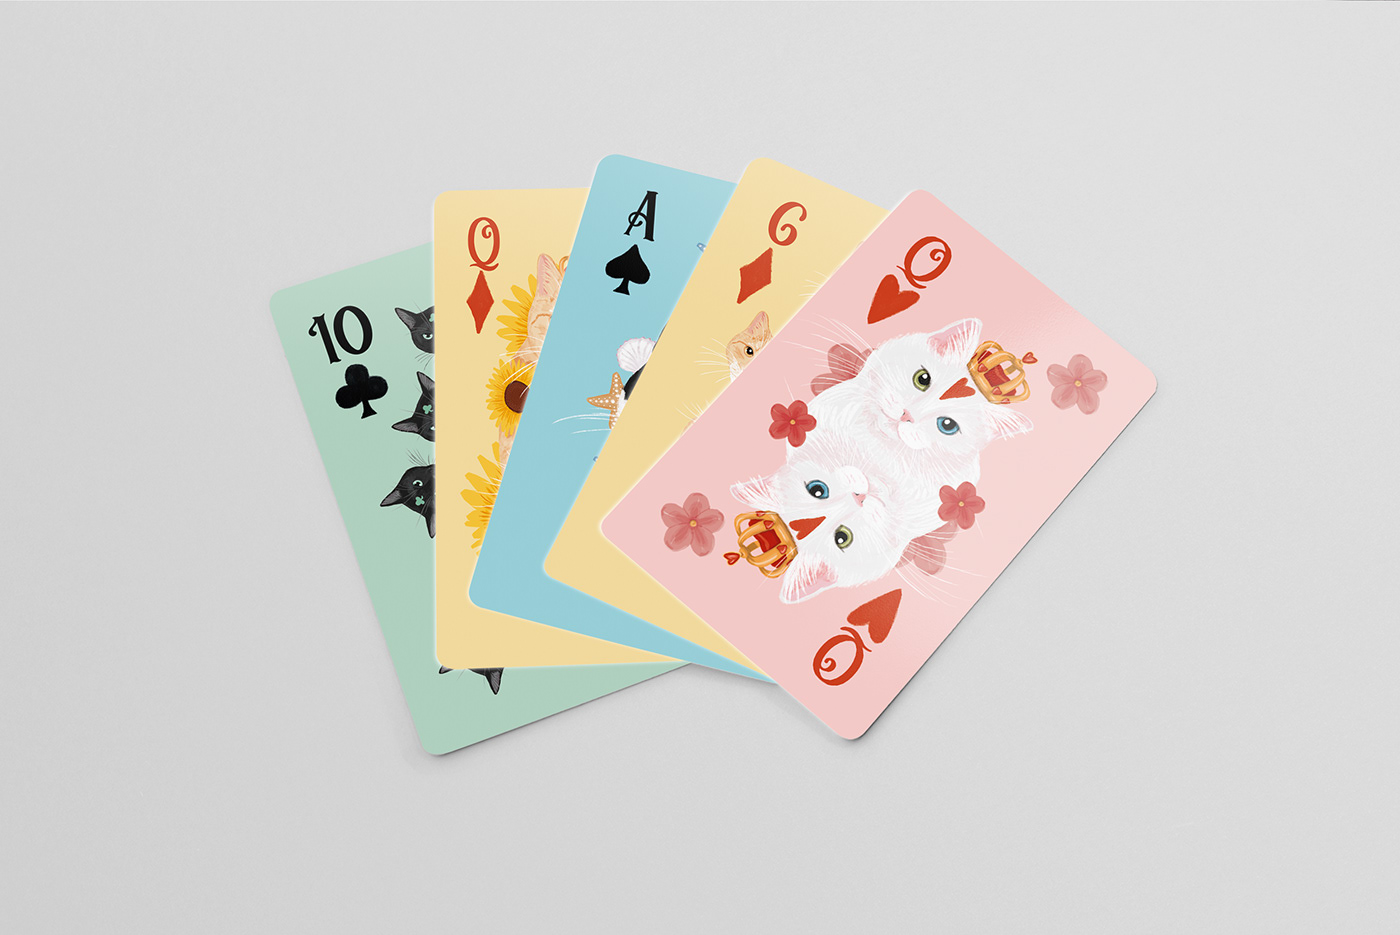 Baralho Baralho Ilustrado cards cats cats playing cards gatos illustrated illustrated playing cards Playing Cards deck